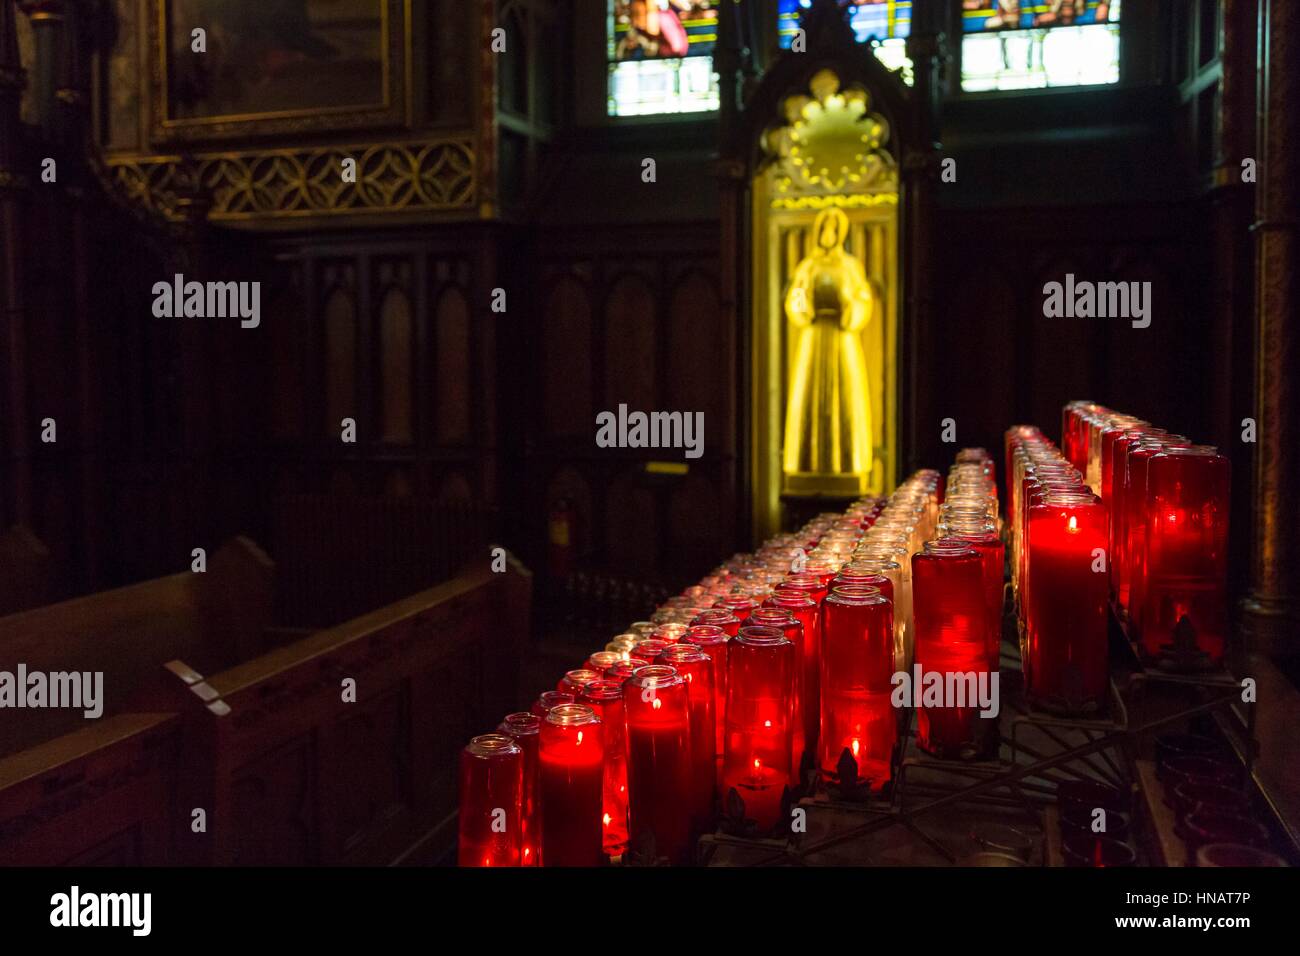 Candles in Basilica Notre Dame, Old City, Montreal, Quebec. Stock Photo